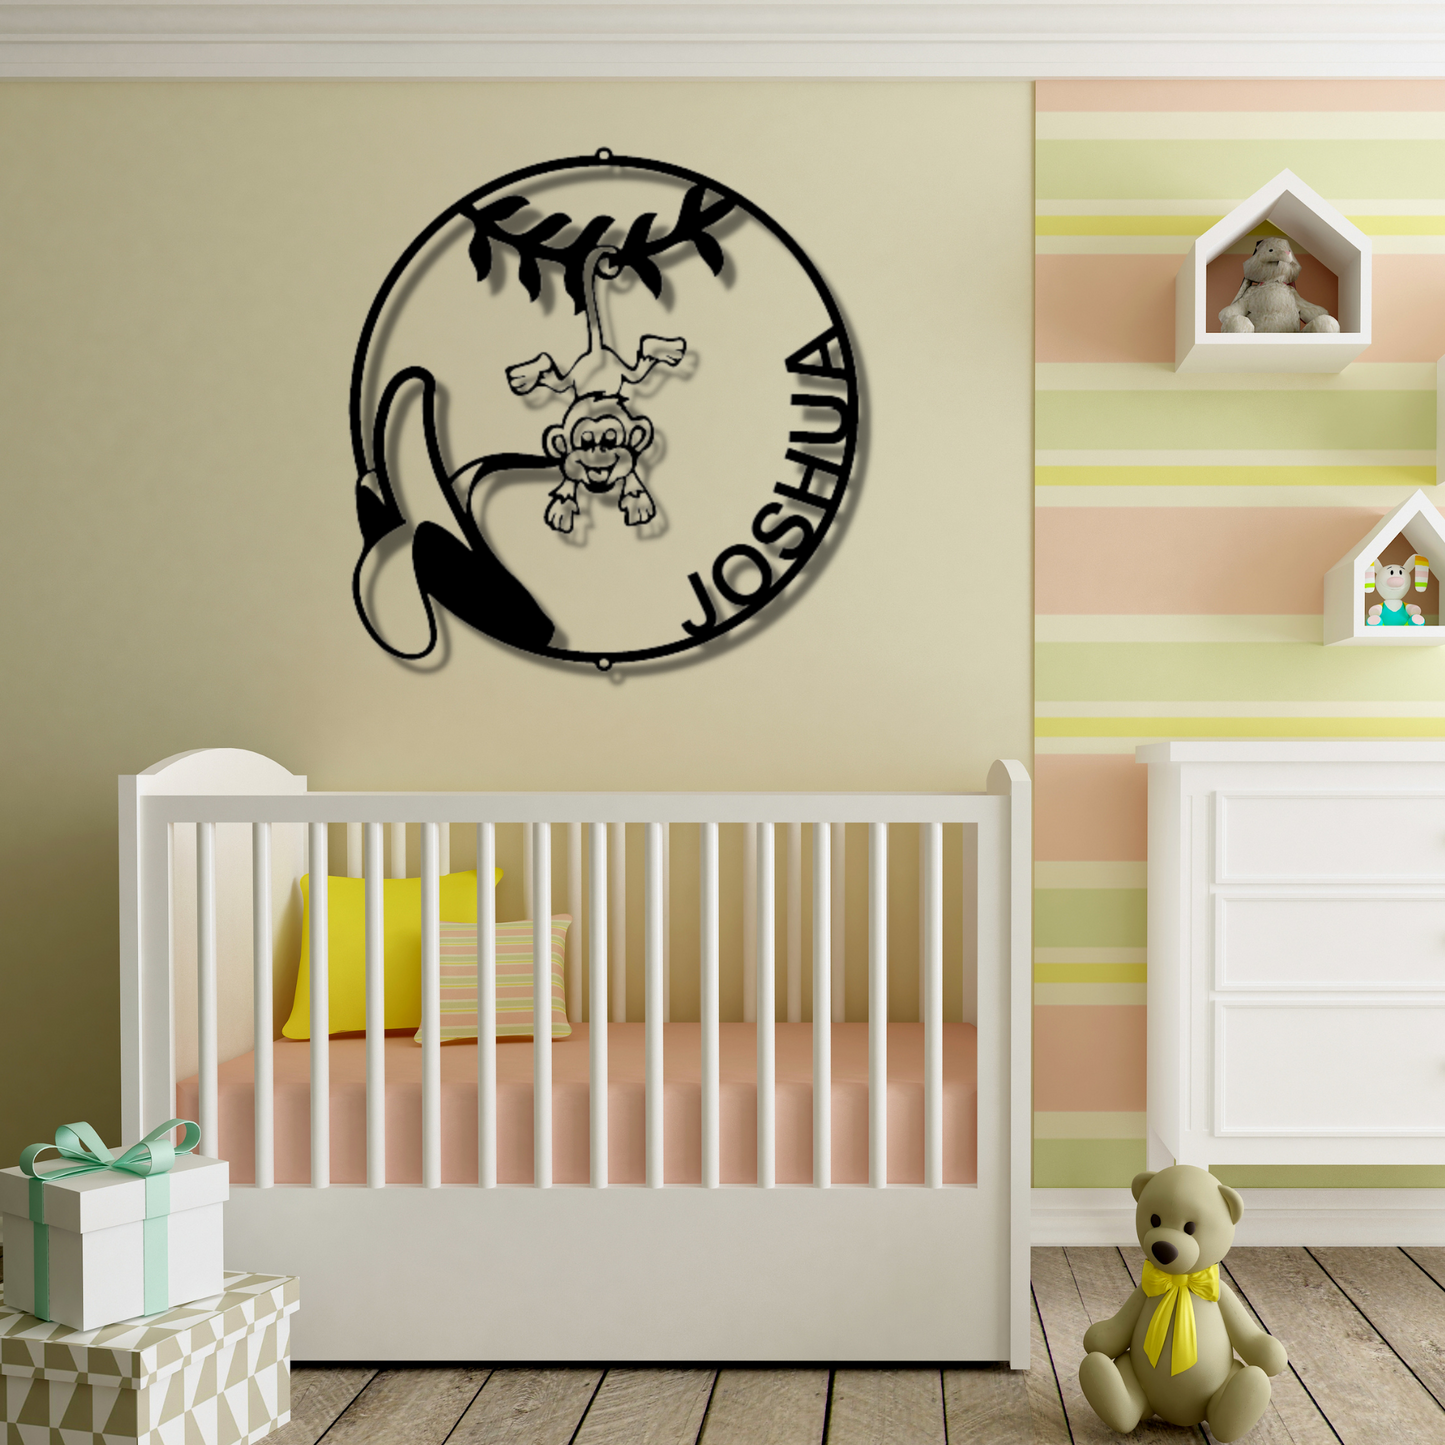 Our Little Monkey Monogram - Steel Sign, Personalized Metal Wall Decor, House Decor, Wall Art, Metal Signs, Metal Decorative Sign